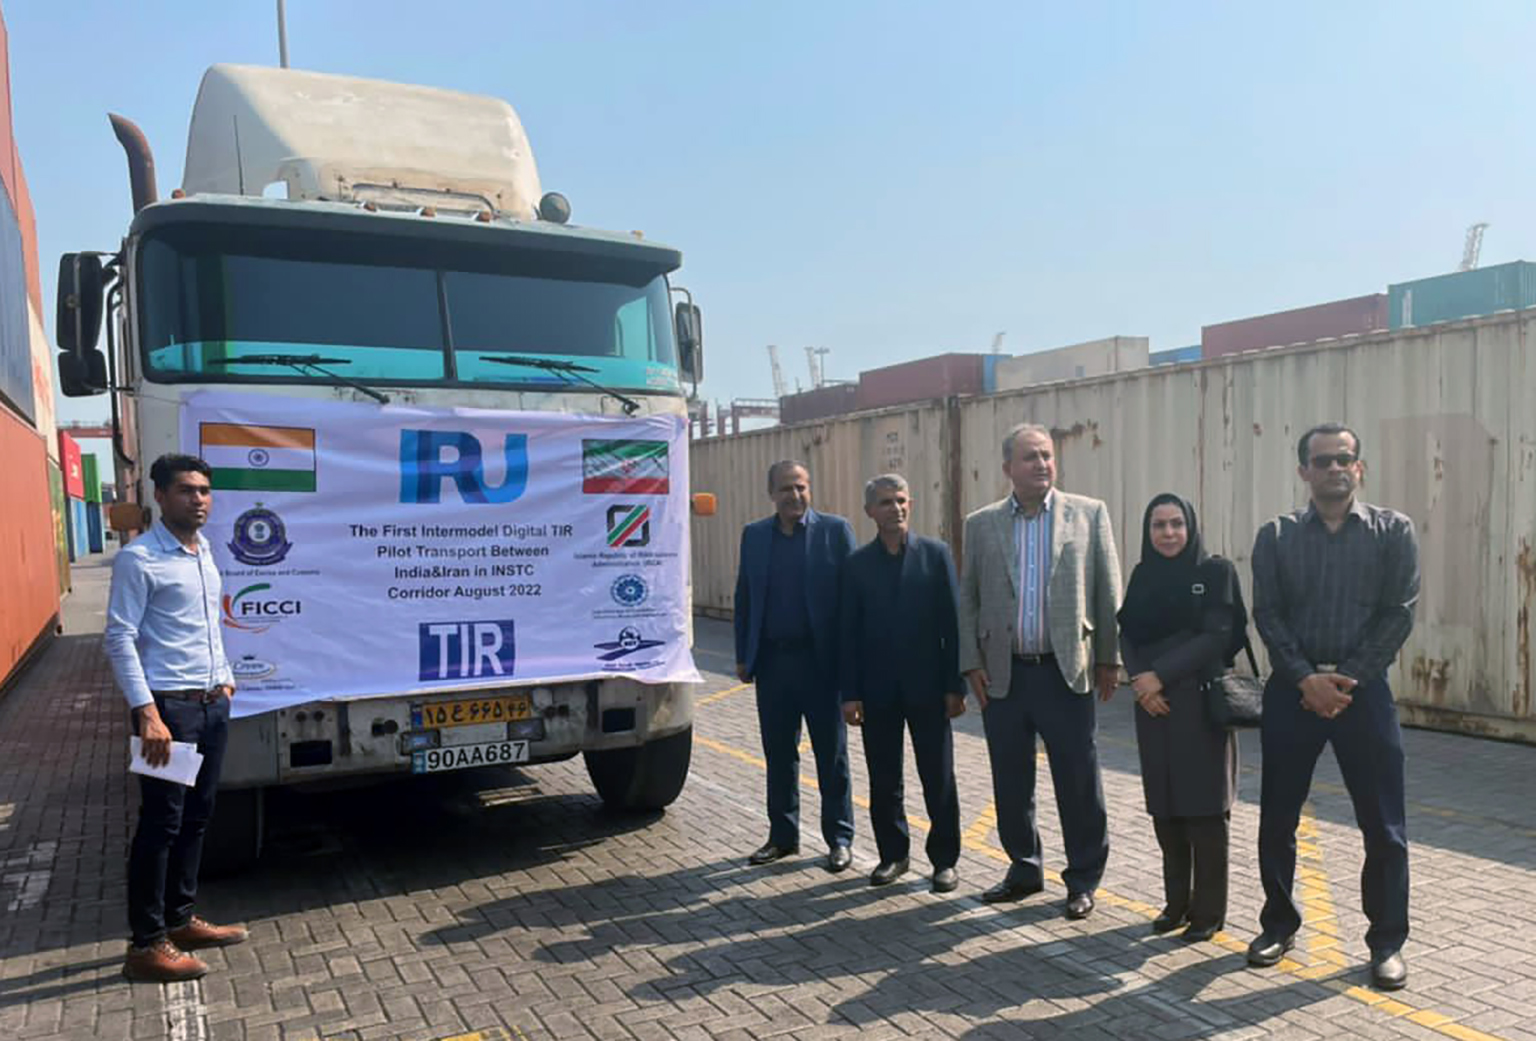 First fully digital intermodal TIR transport piloted from India to Iran